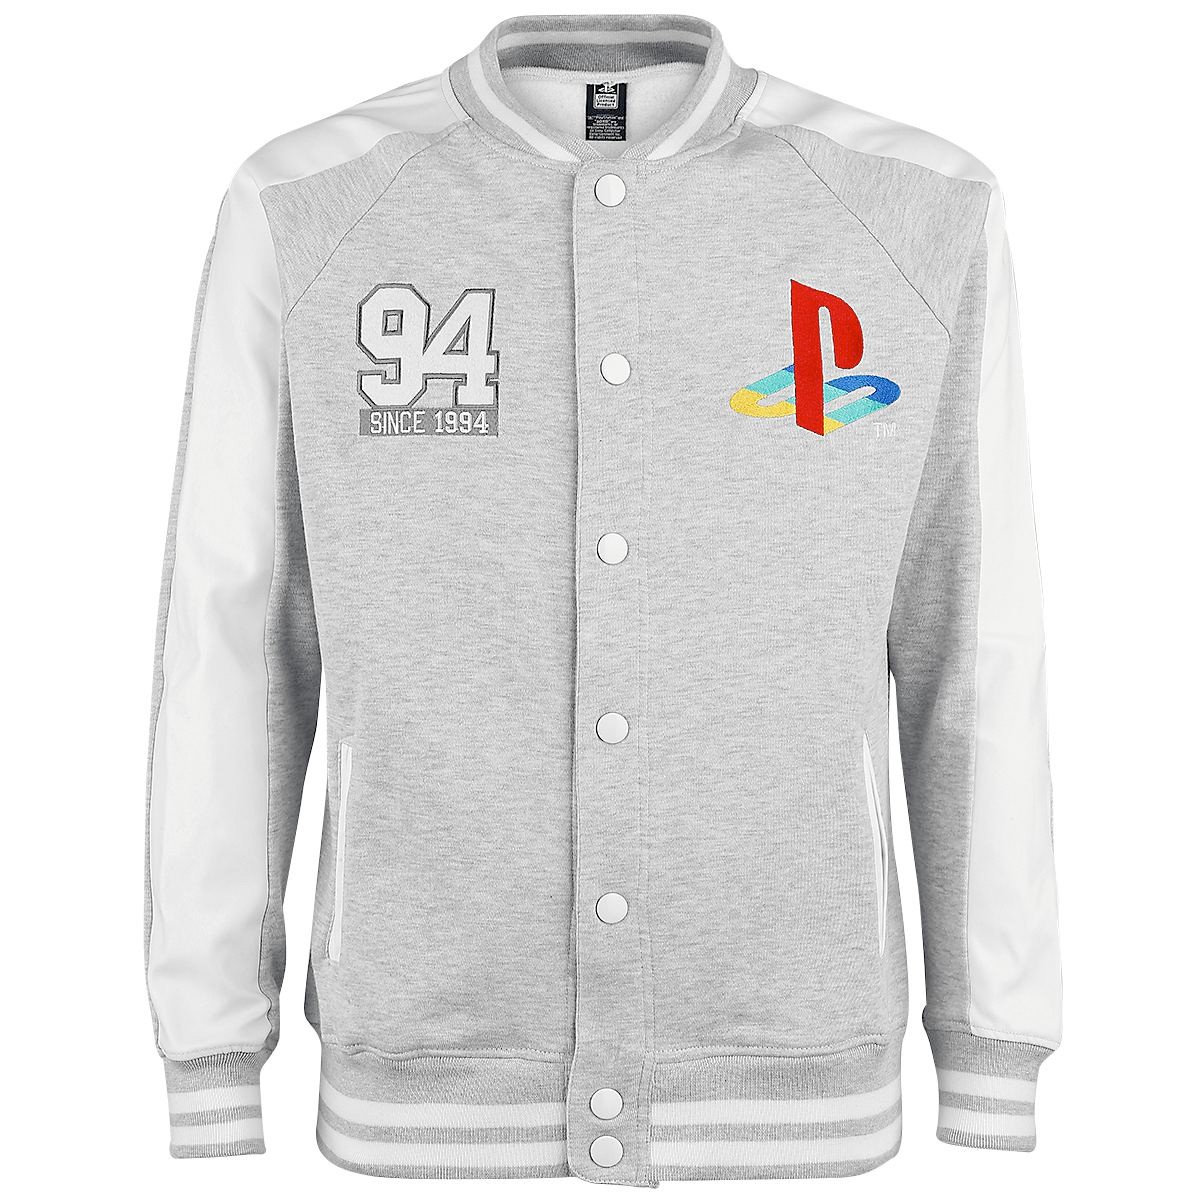 Playstation - Since 94 College Jacket - Grey - Small